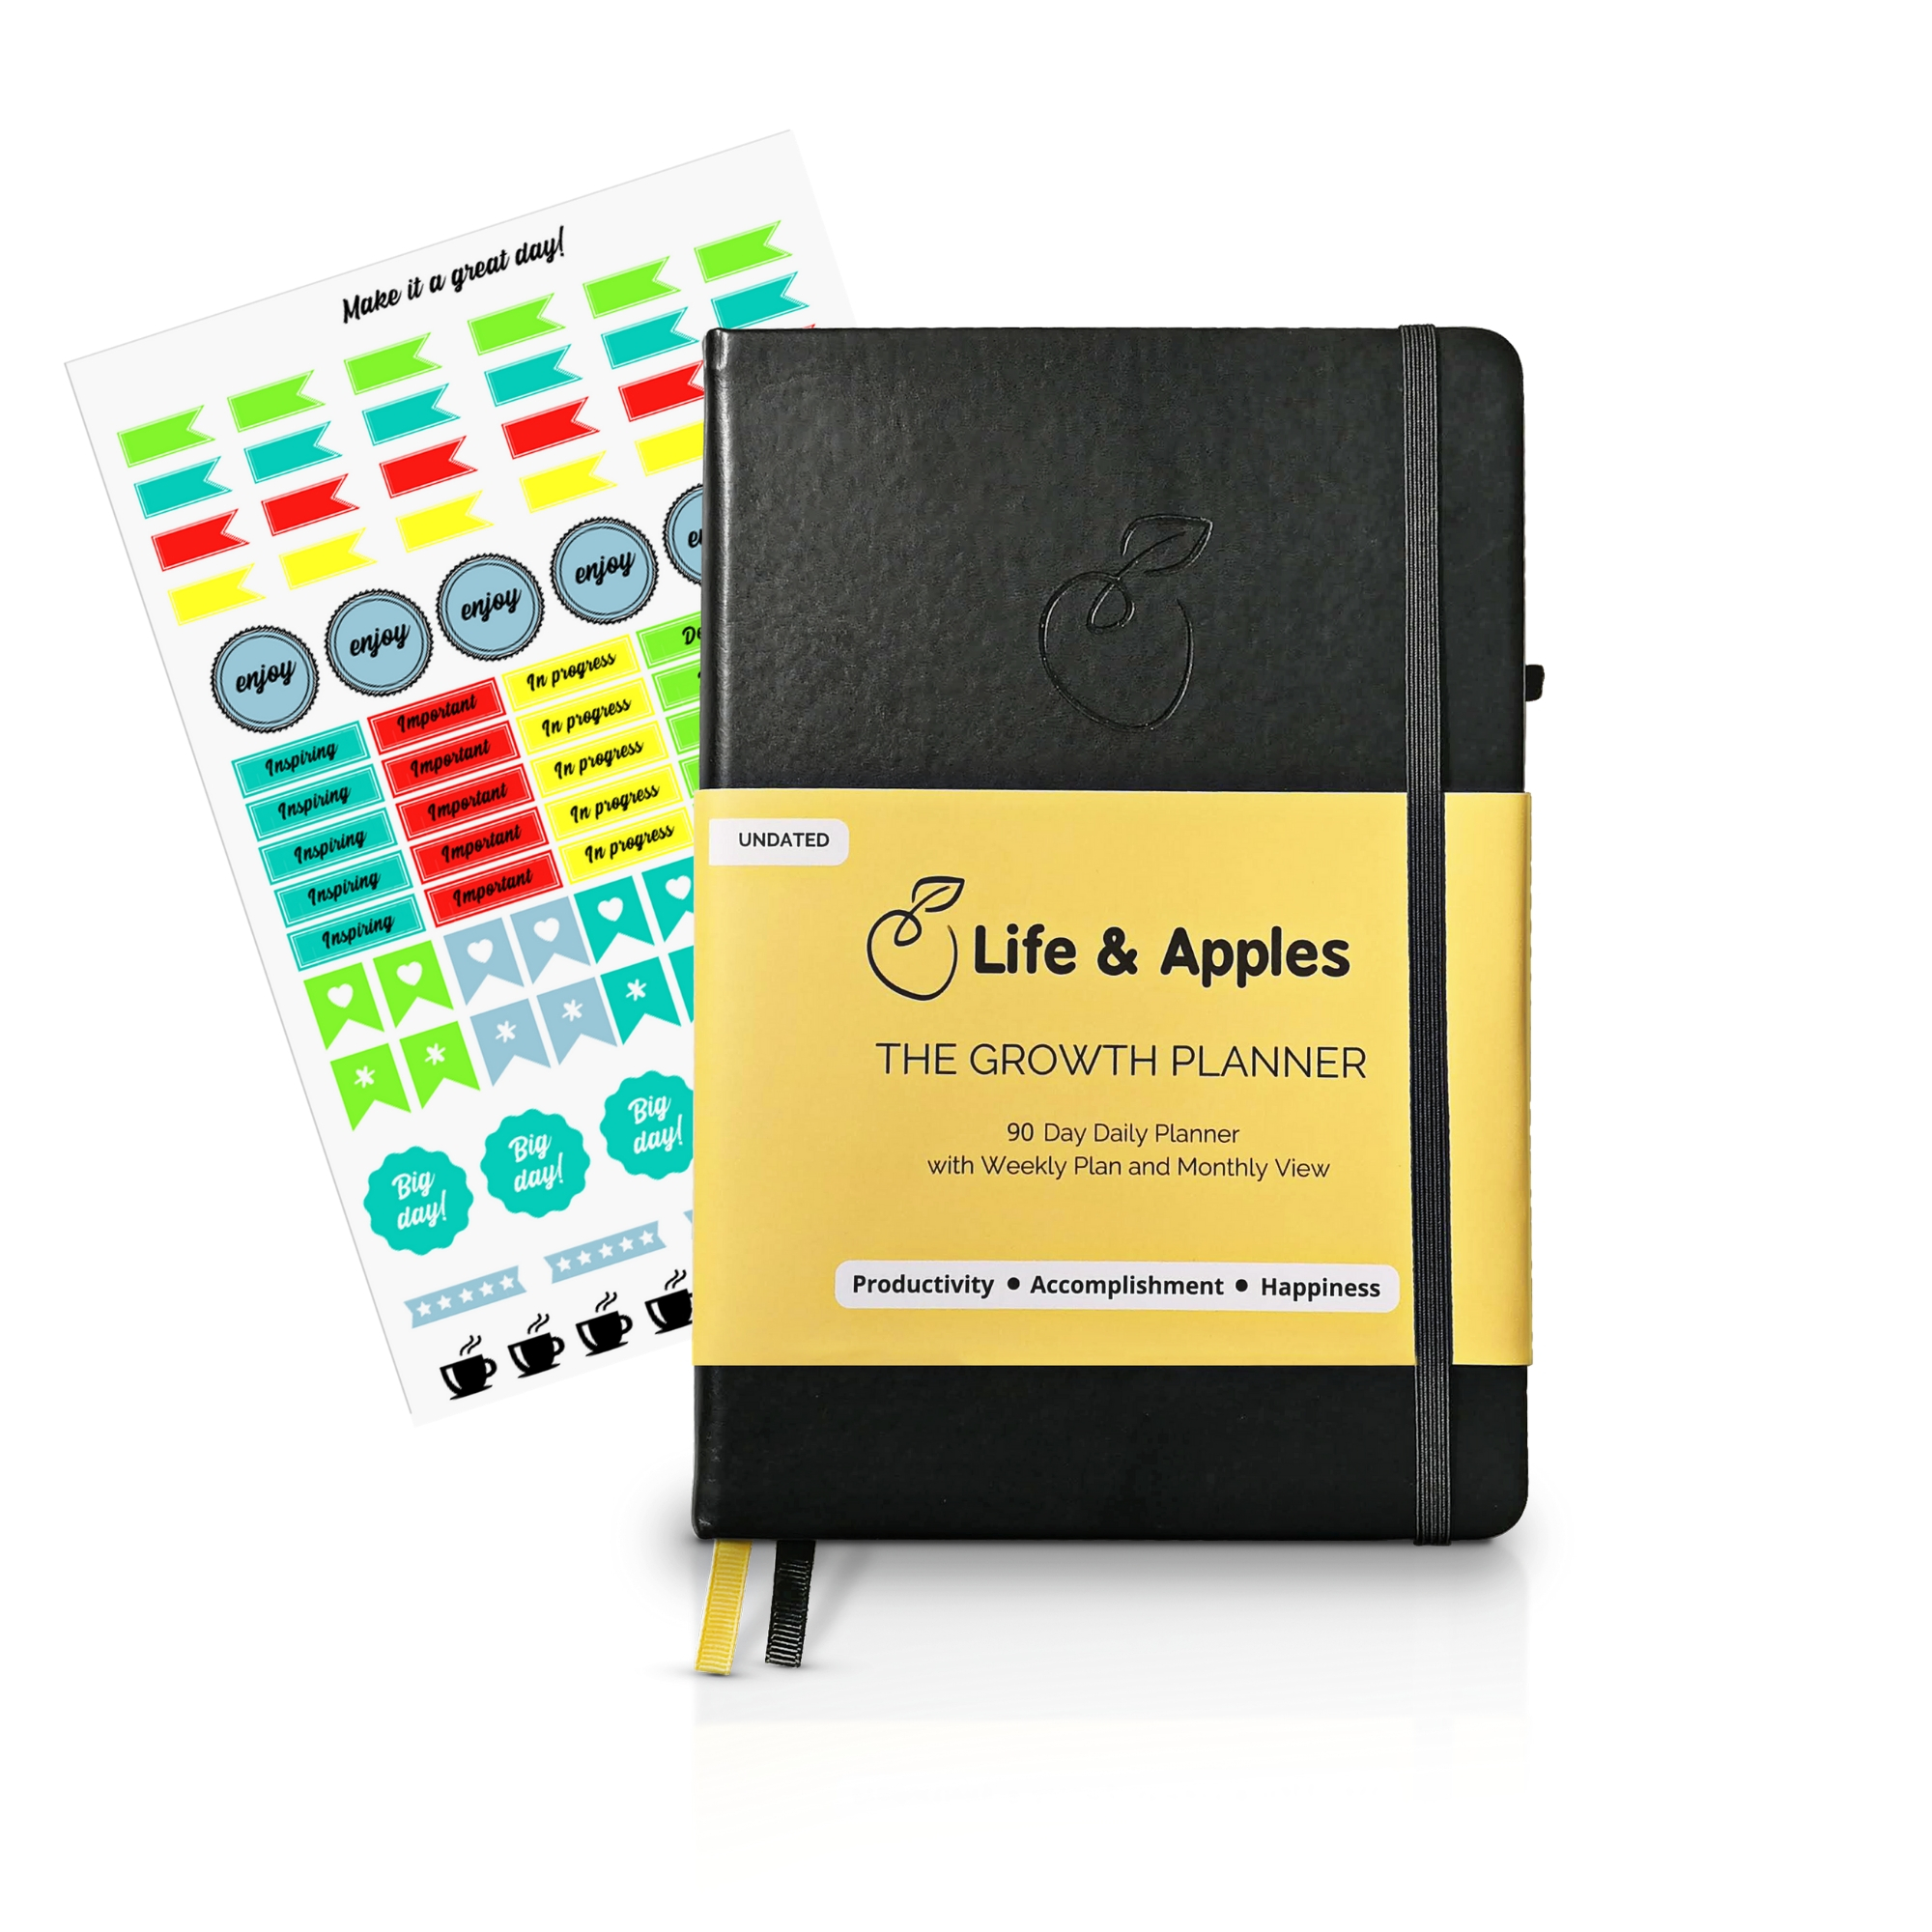 The Growth Planner by Life & Apples